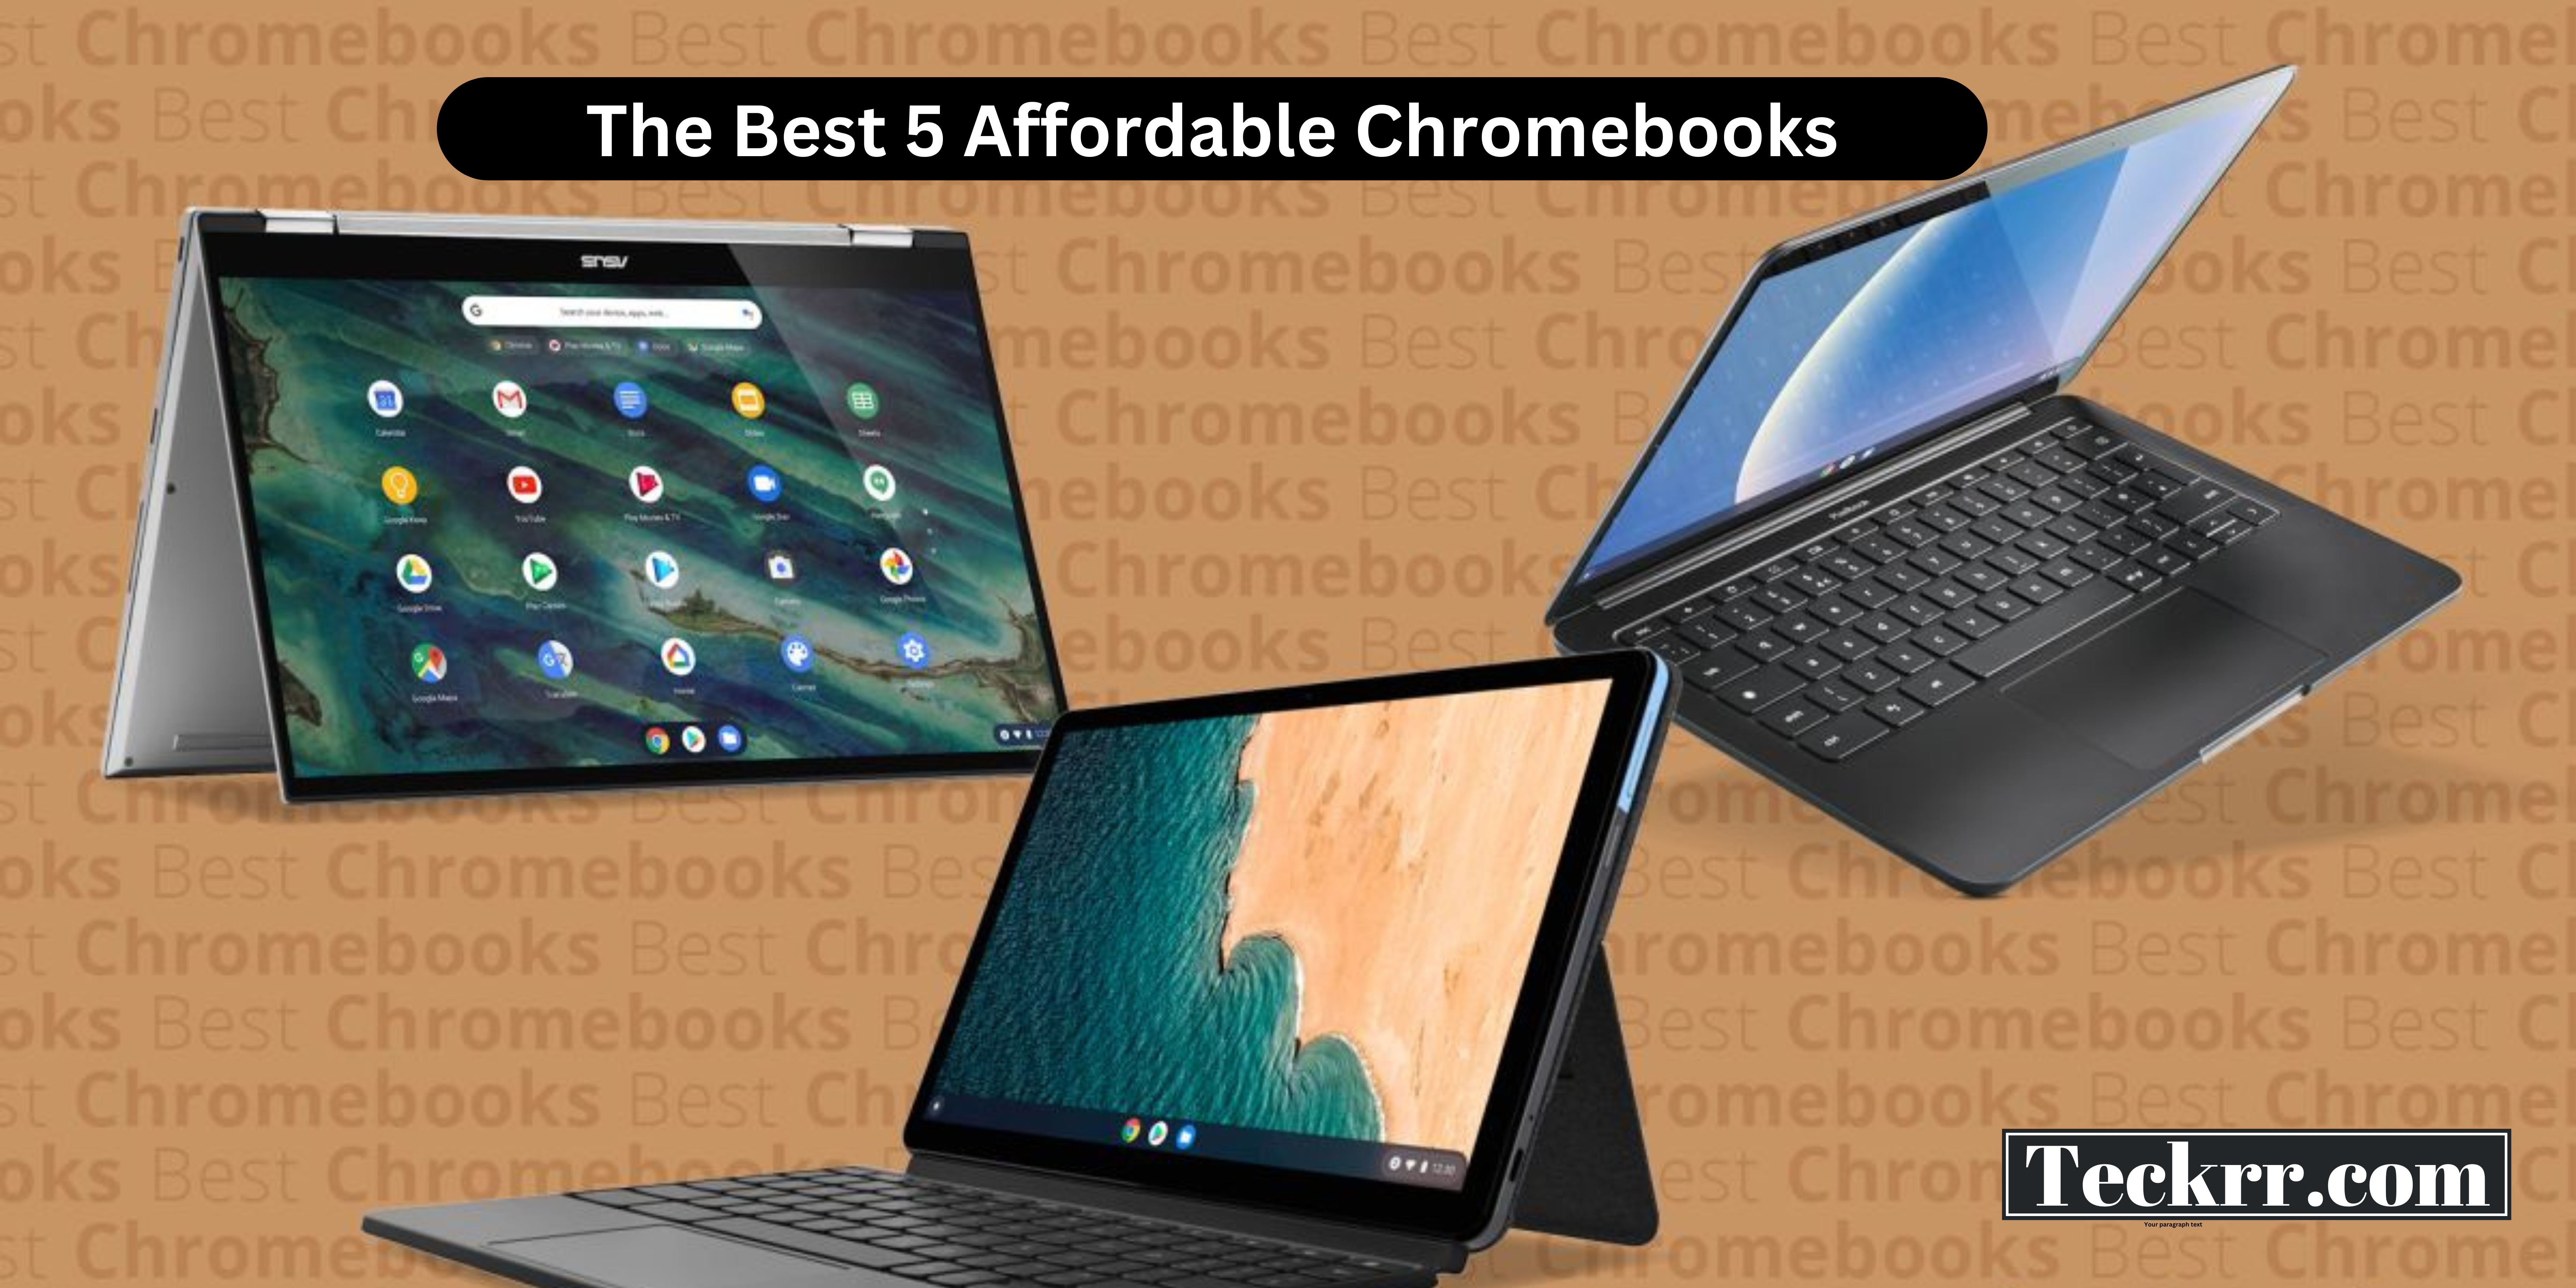 the best 5 affordable chromebooks for back-to-school or distance learning